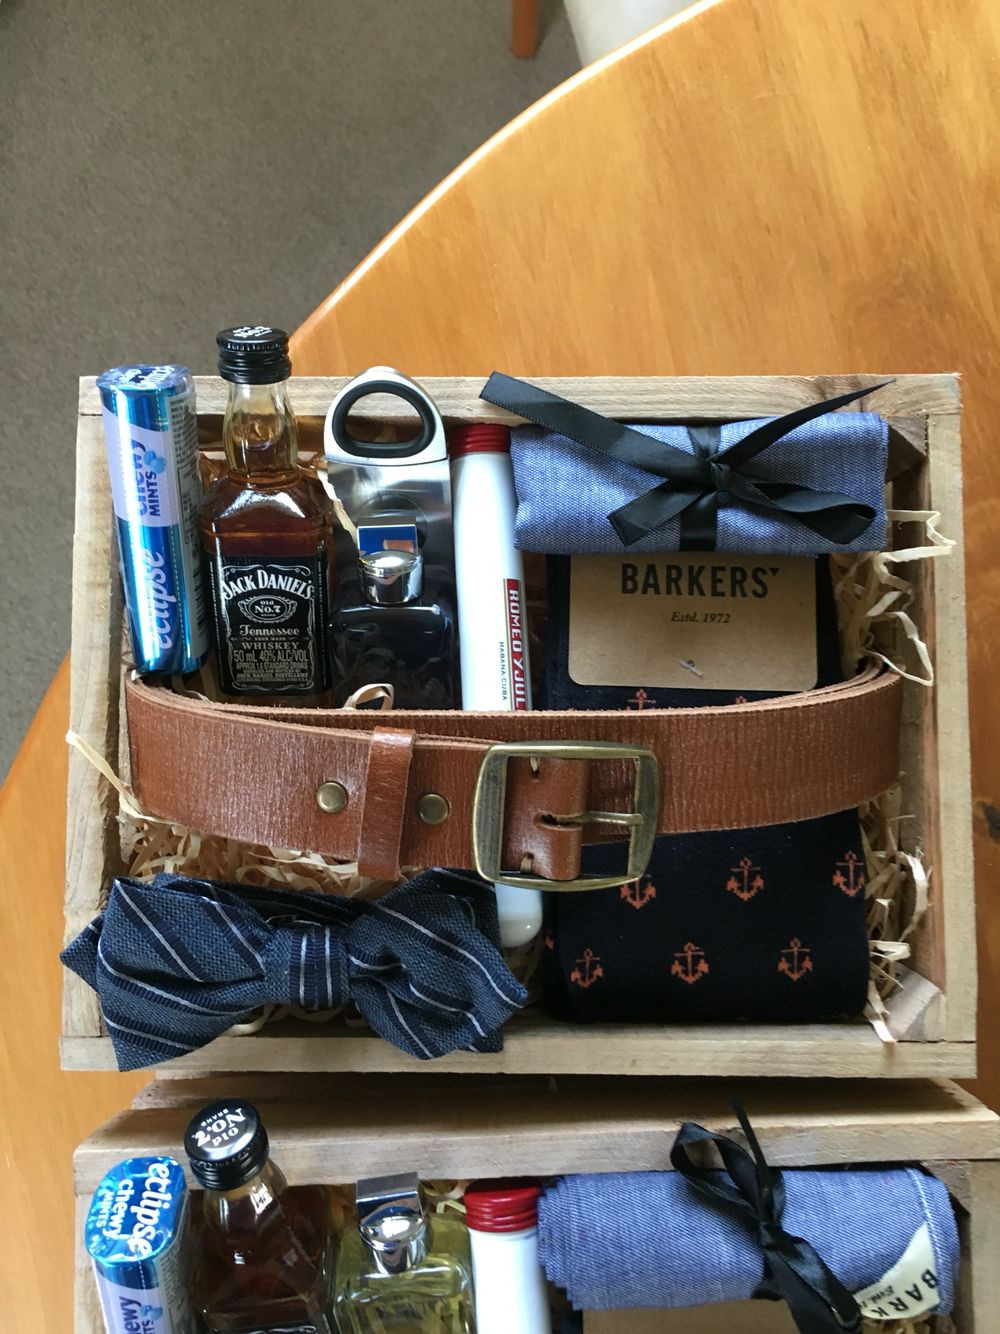 Wedding Party Gift Ideas For Groomsmen
 Wonderful 30 Manly Groomsmen Gifts Ideas For Your Bud s